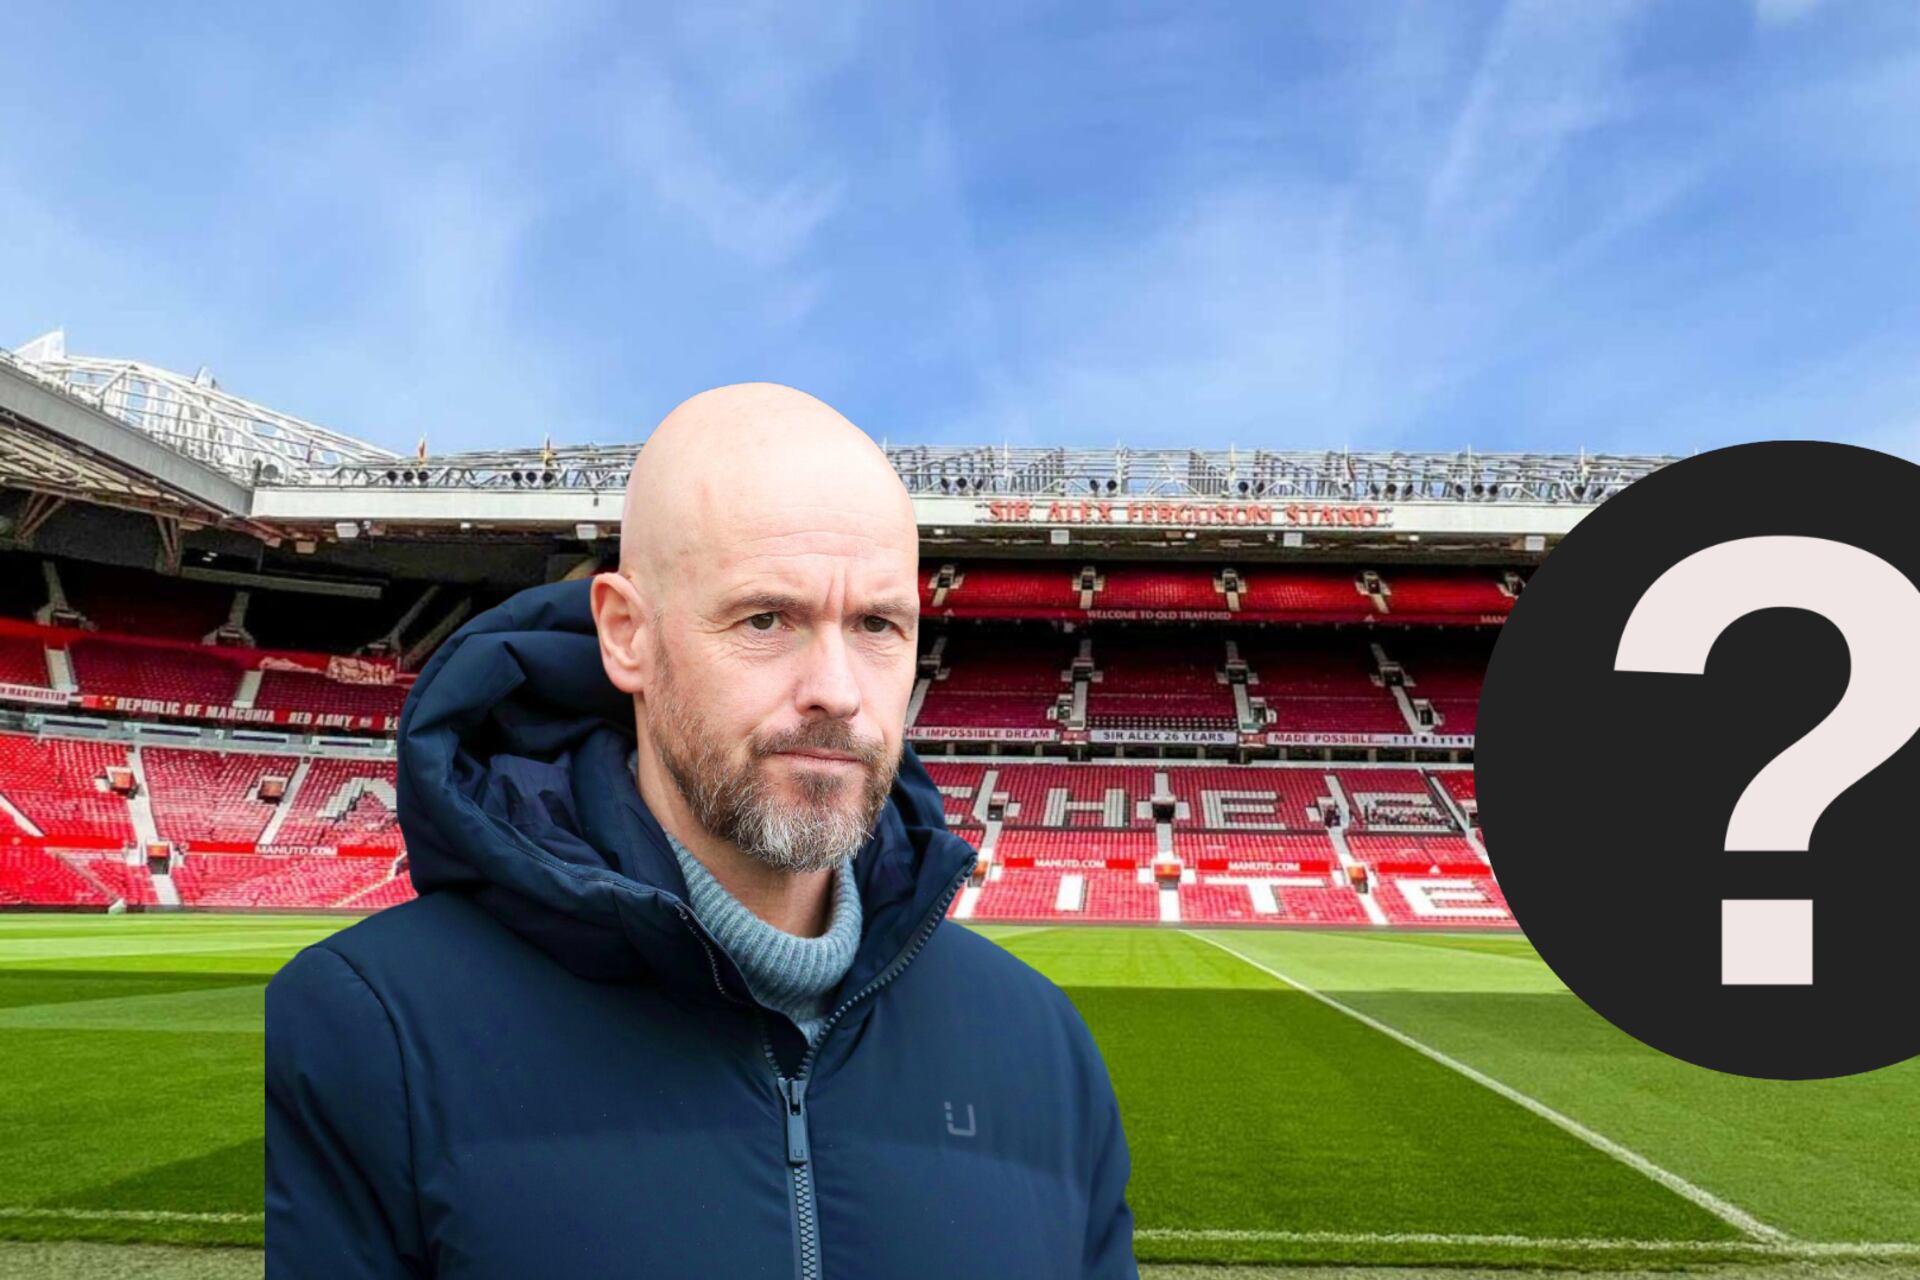 No Man United, no problem, Ten Hag dreams to join a European giant if sacked